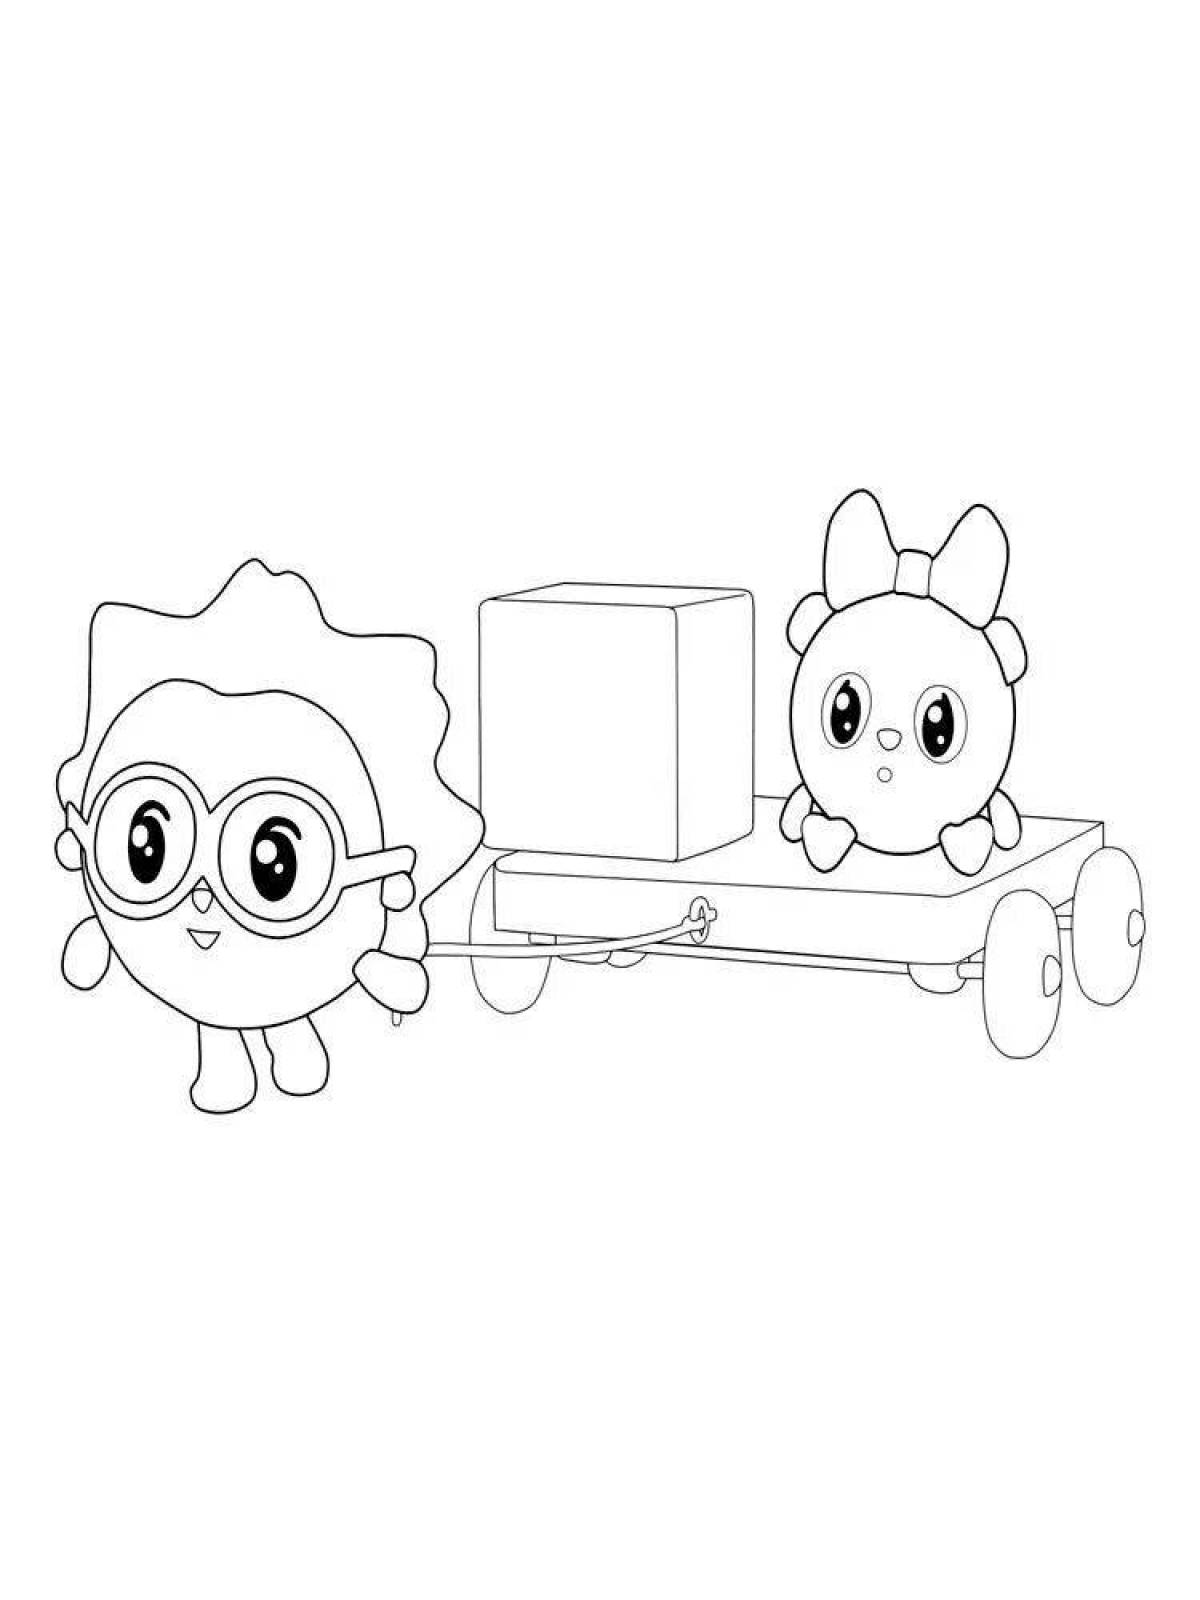 Fuzzy coloring pages for kids